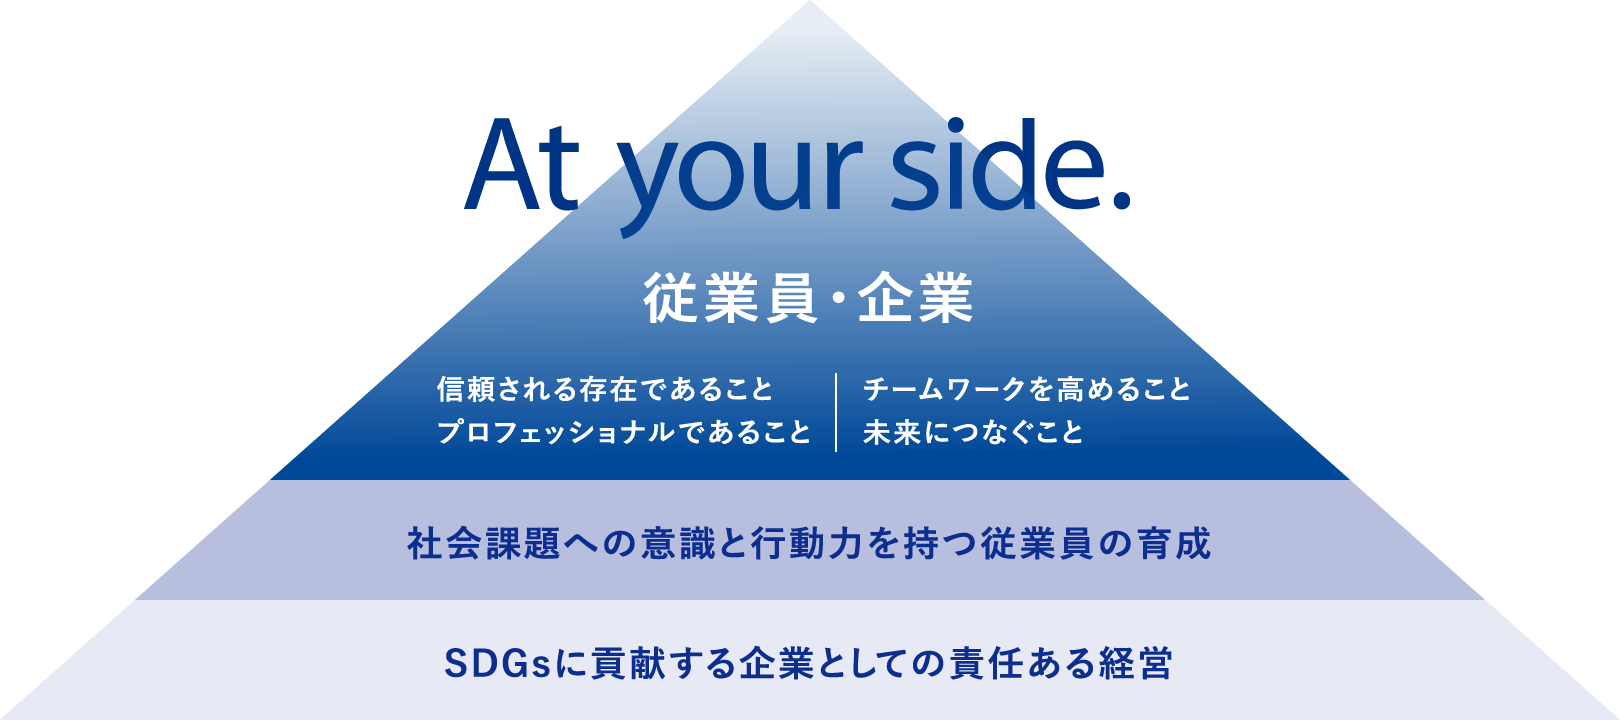 At your side. 従業員・企業